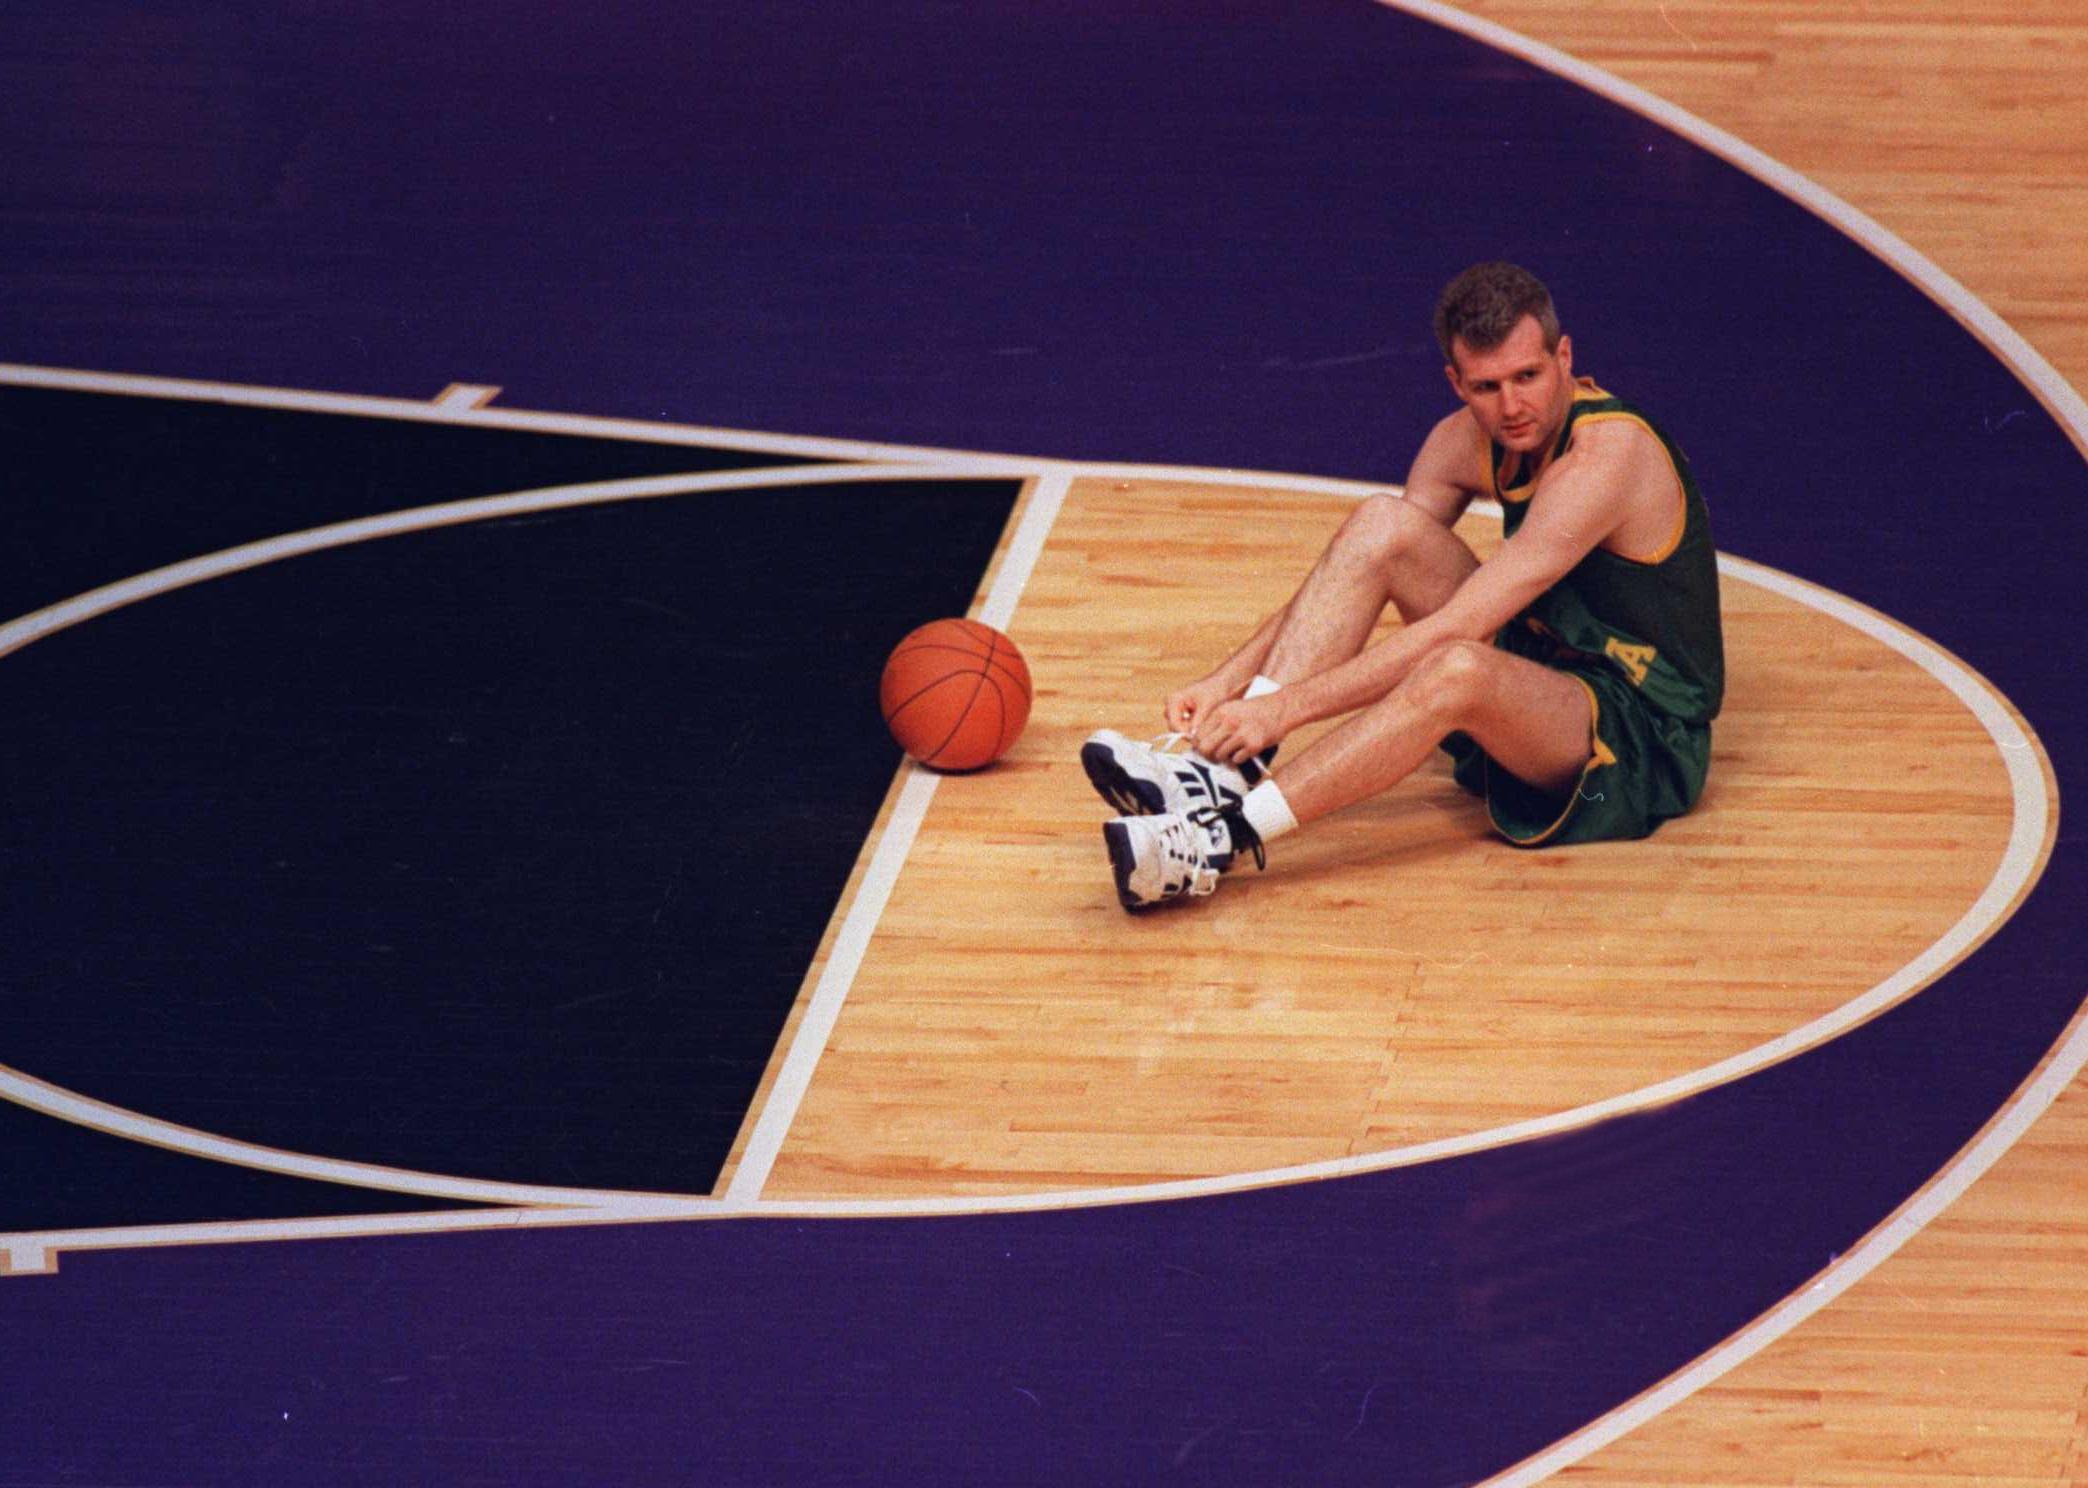 Andrew Gaze takes a time-out to tie his shoe.